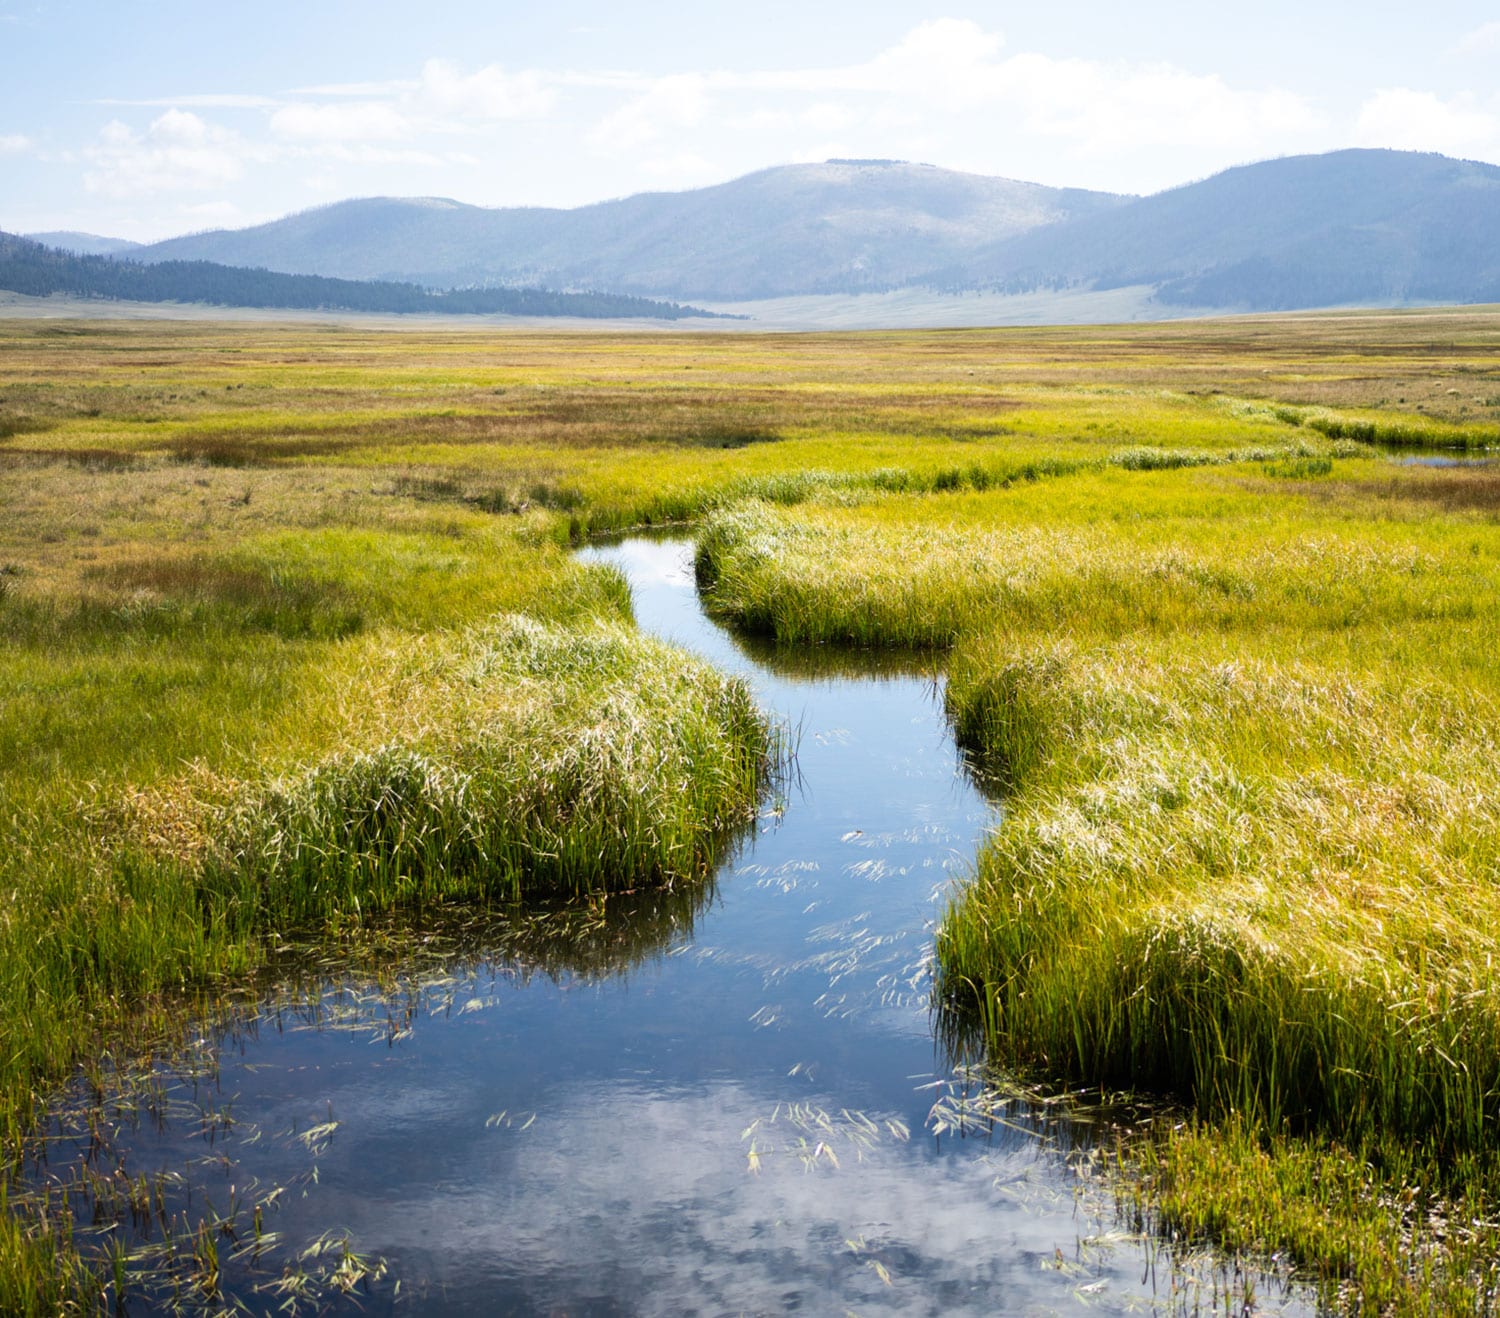 Restful view of a stream through the flats of the Valles Caldera.